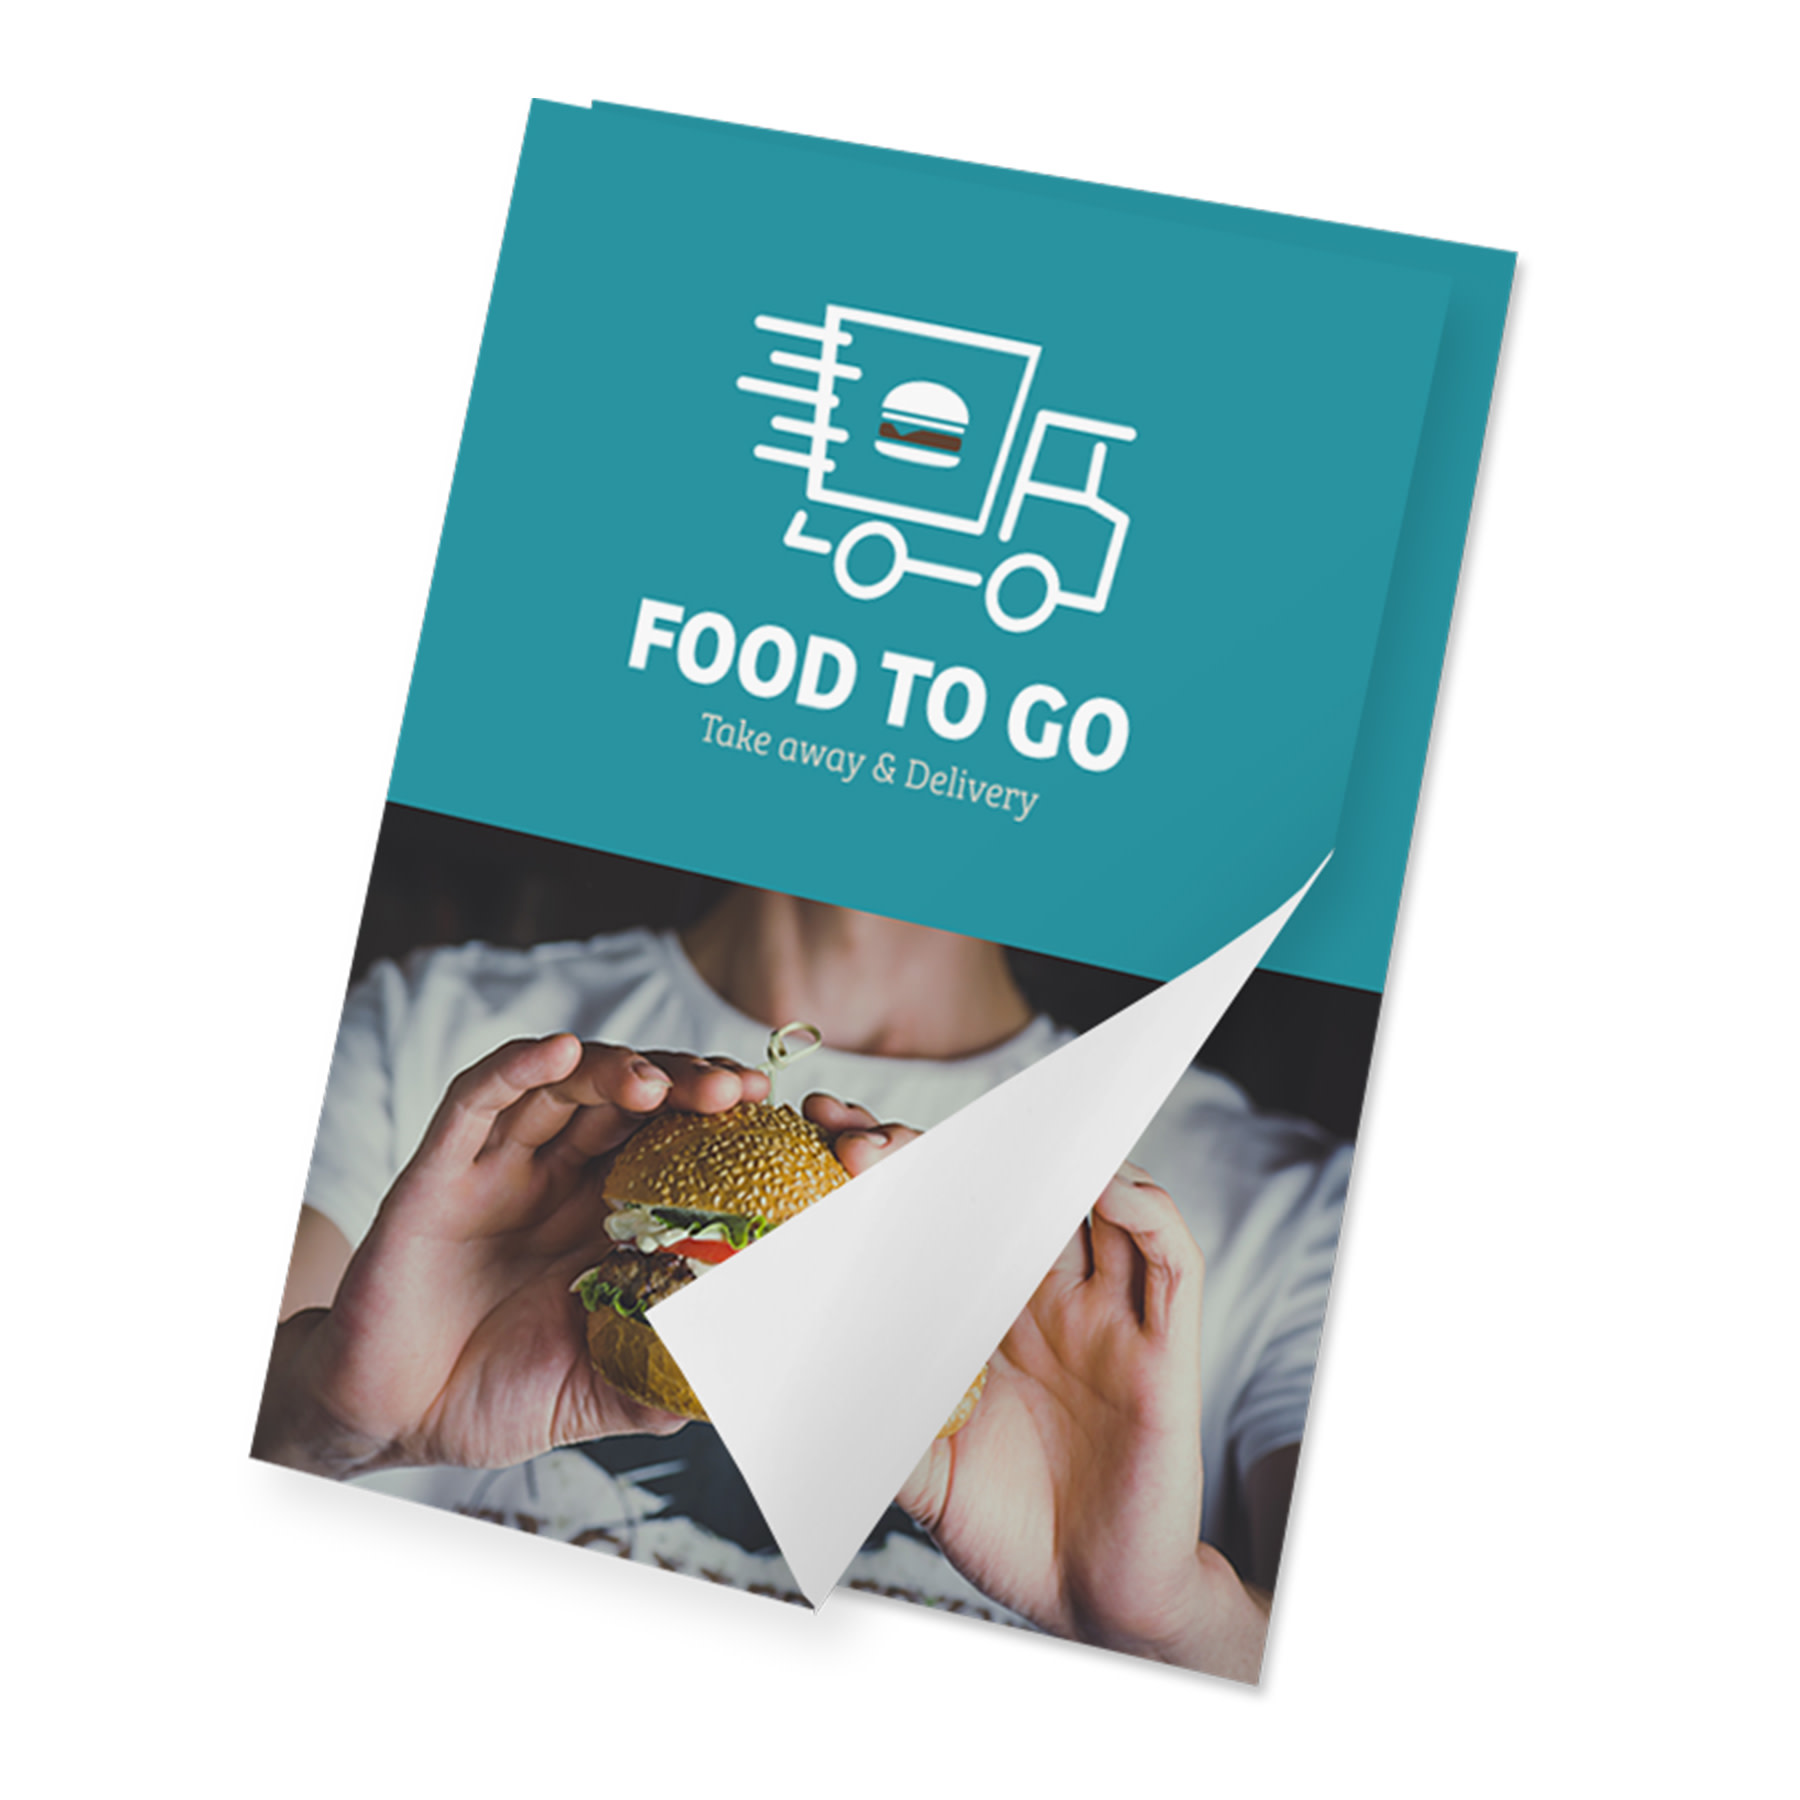 Food To Go posters